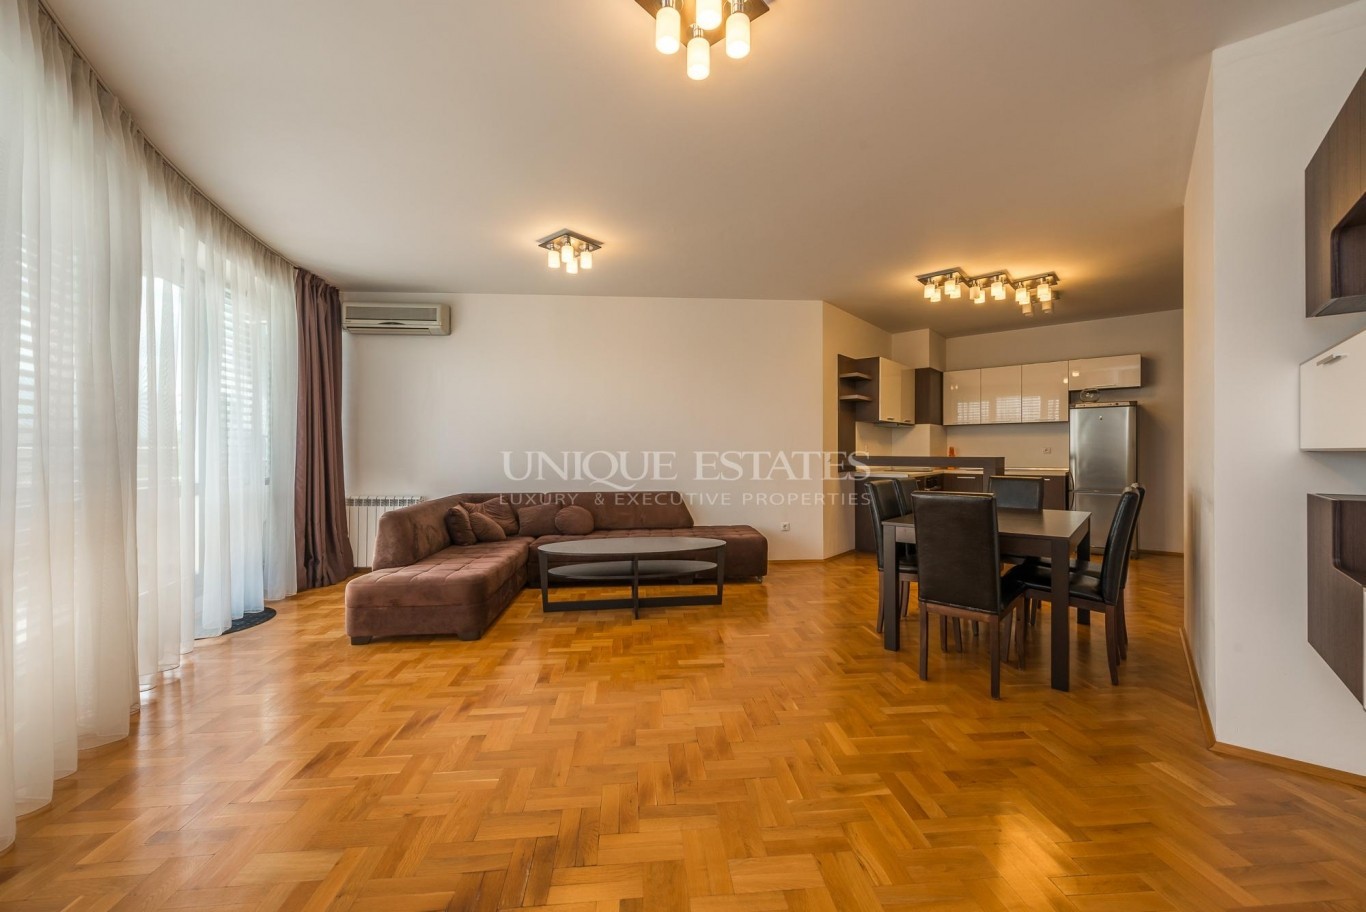 Apartment for sale in Sofia, Iztok with listing ID: K8155 - image 1